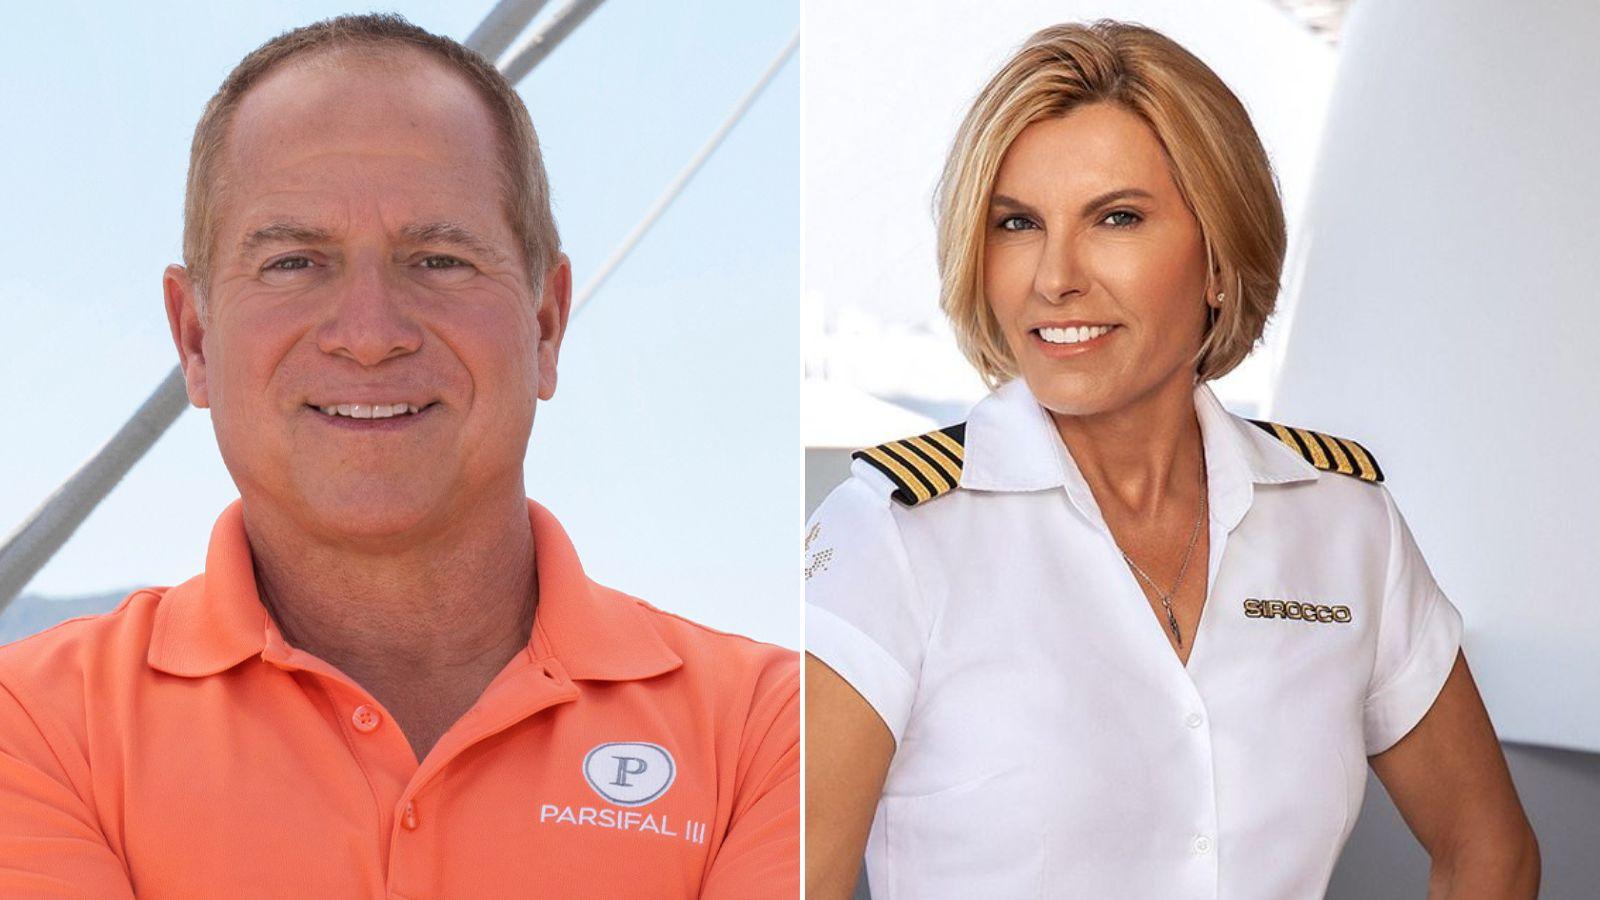 Captain Sandy and Captain Glenn from Below Deck